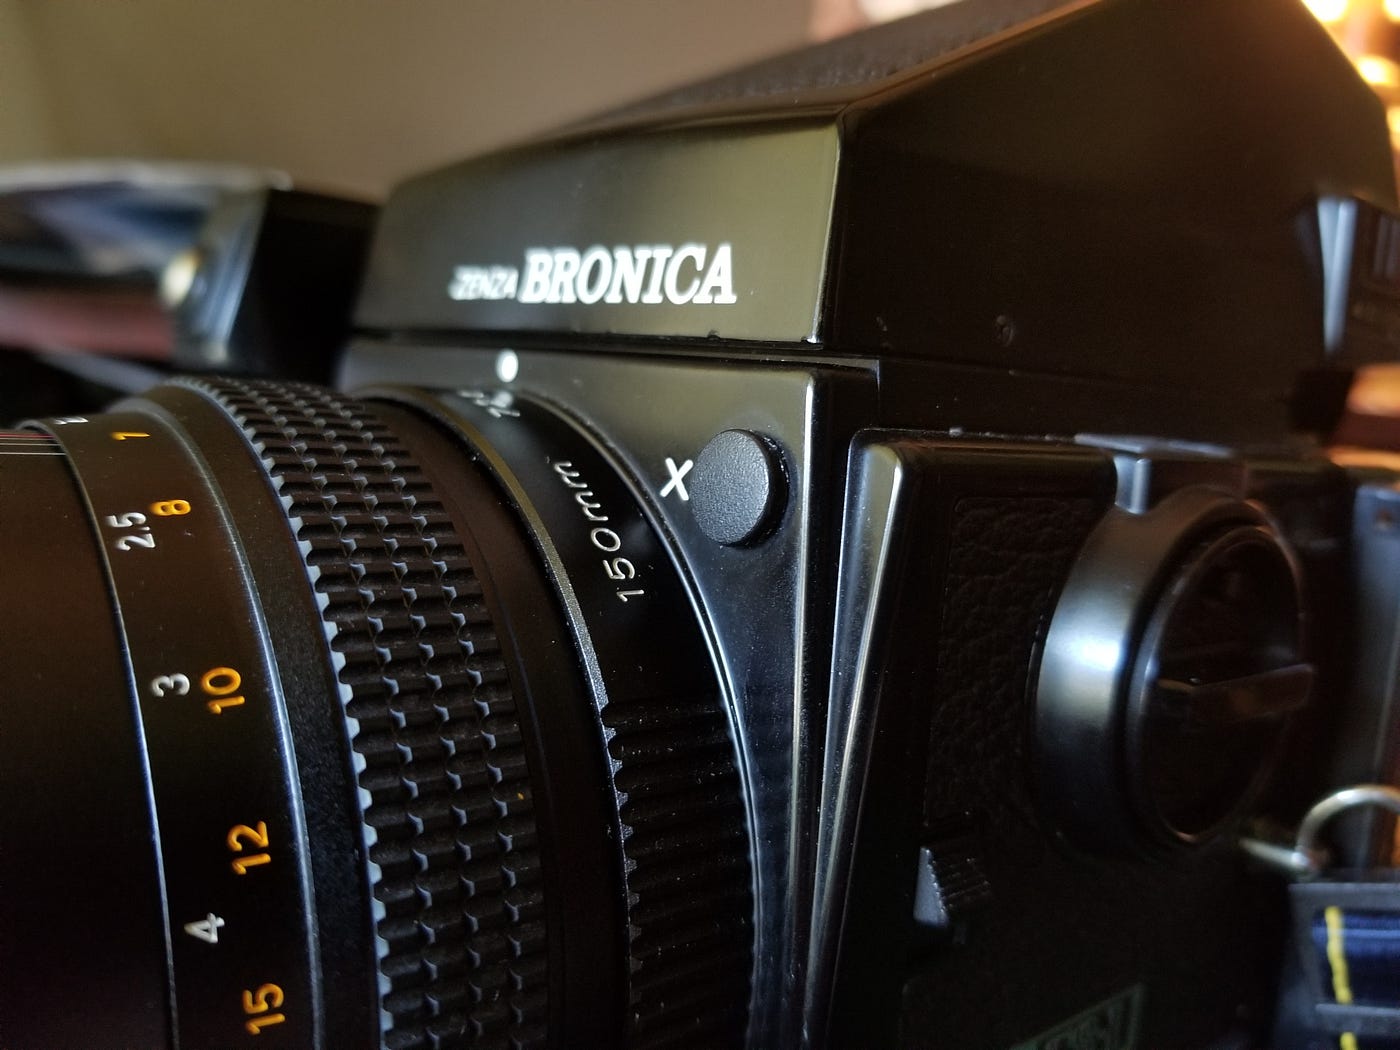 I Dreamed of Bronica. You're supposed to be here. Make no… | by